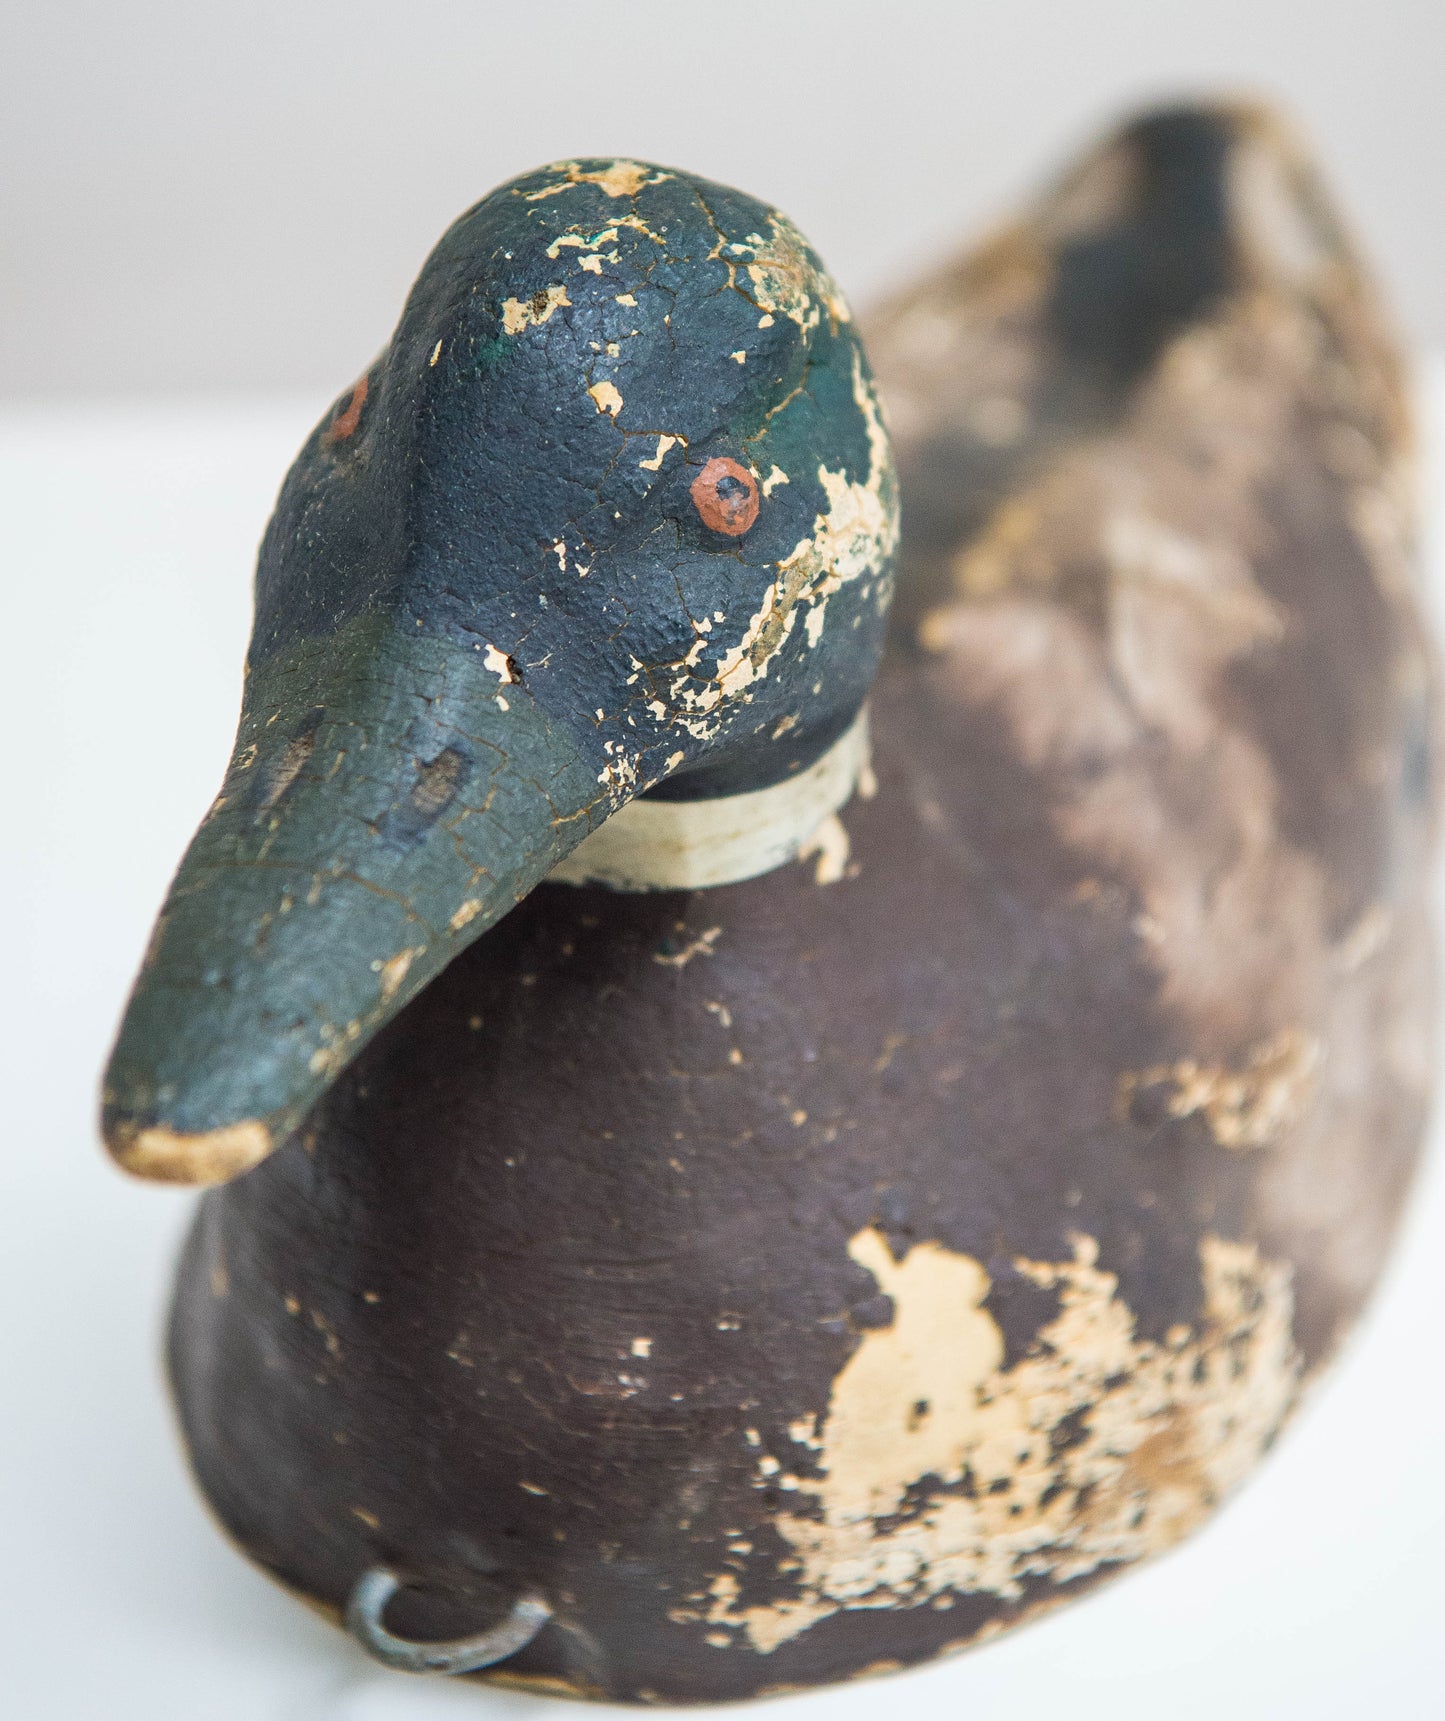 An Early English Hand made Polychrome Duck Decoy of Plaster construction.